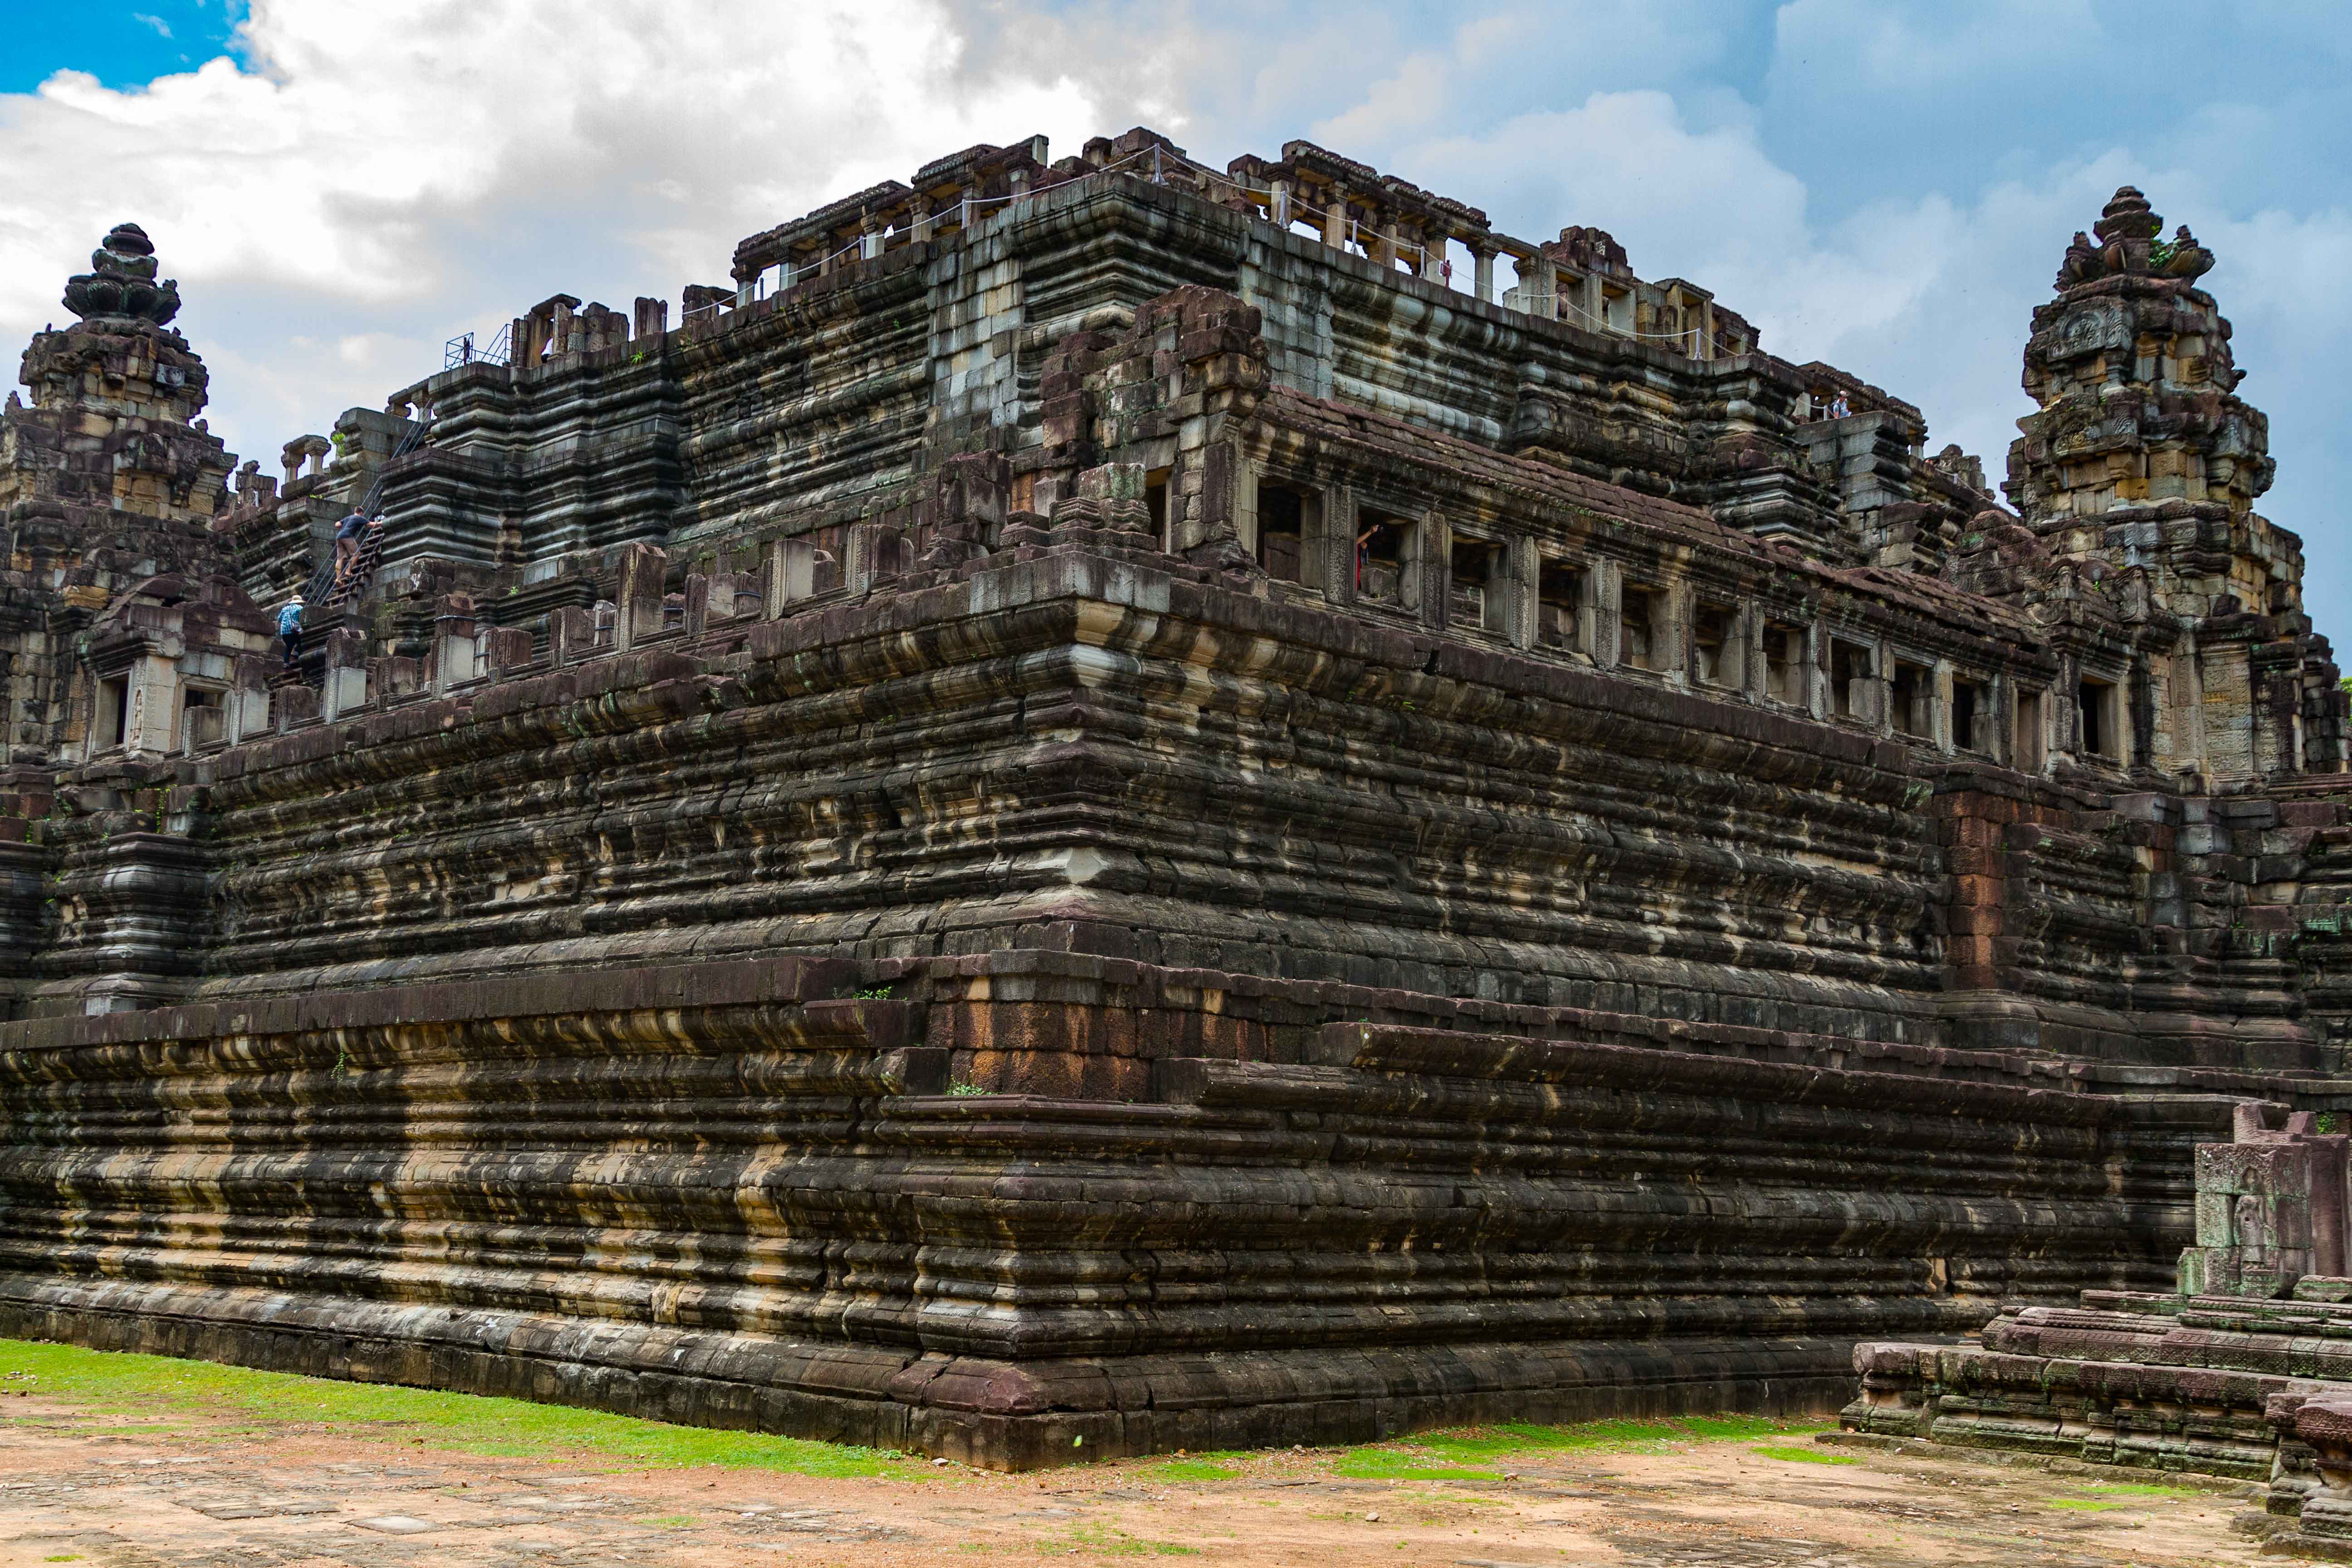 Side-View-of-Baphuon-Temple-at-Angkor-Wat-Cambodia